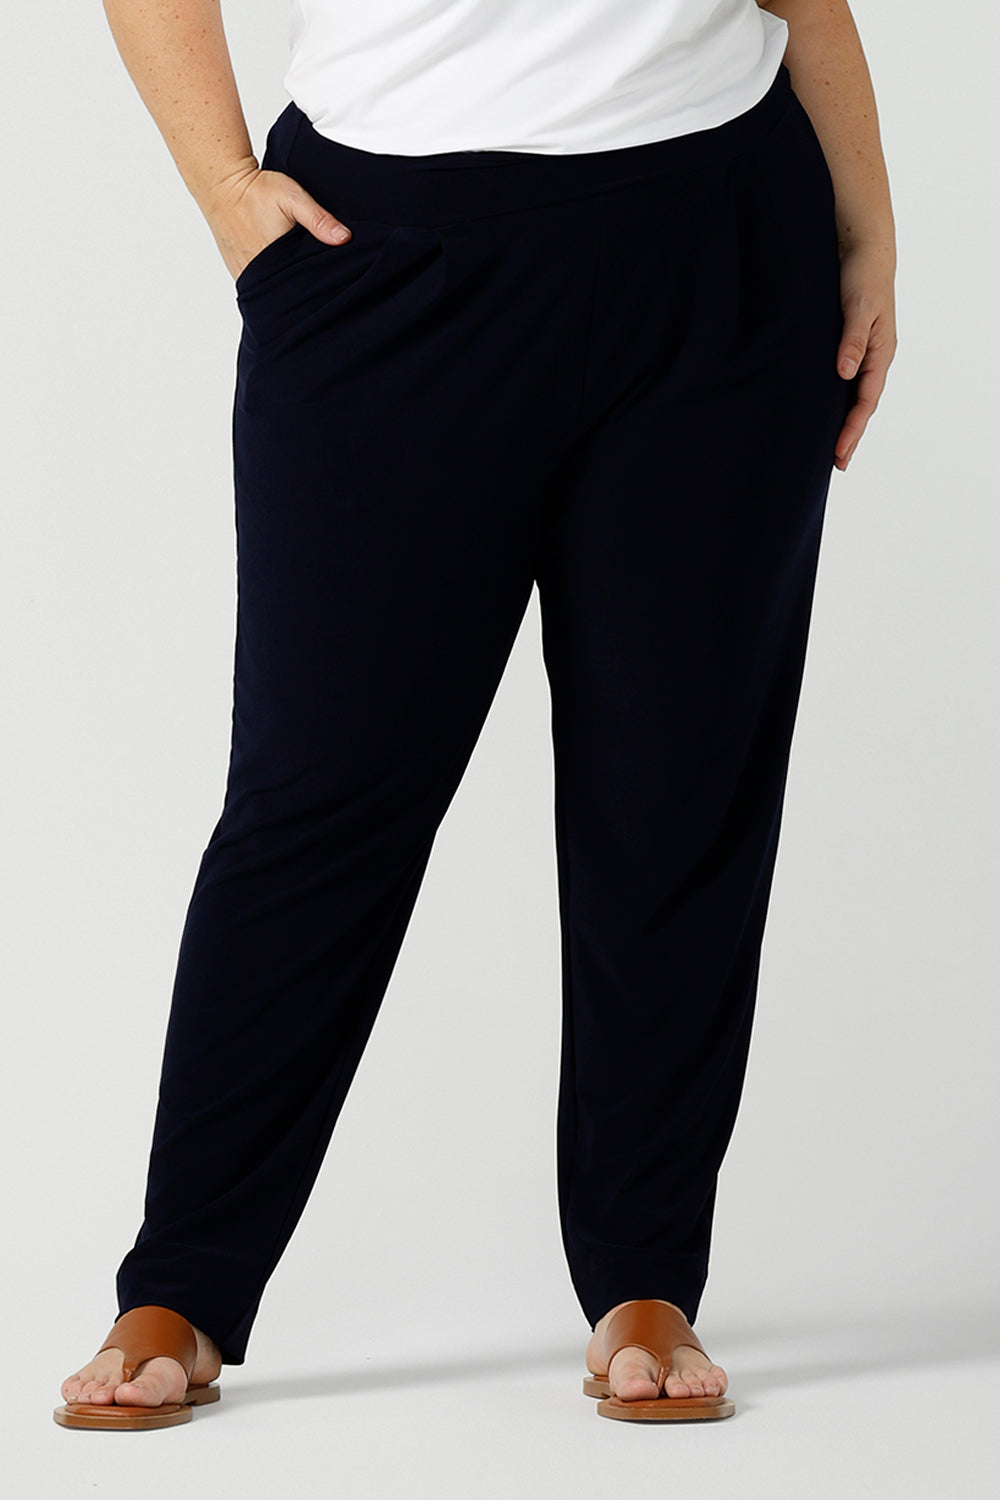 Close up of a curvy size 18 woman wears jersey work pants in navy. Styled back with a white bamboo v-neck top. Comfortable corporate pants for women. Designed and made in Australia for Australian womenswear label Leina & Fleur. Inclusive size range 8 - 24.